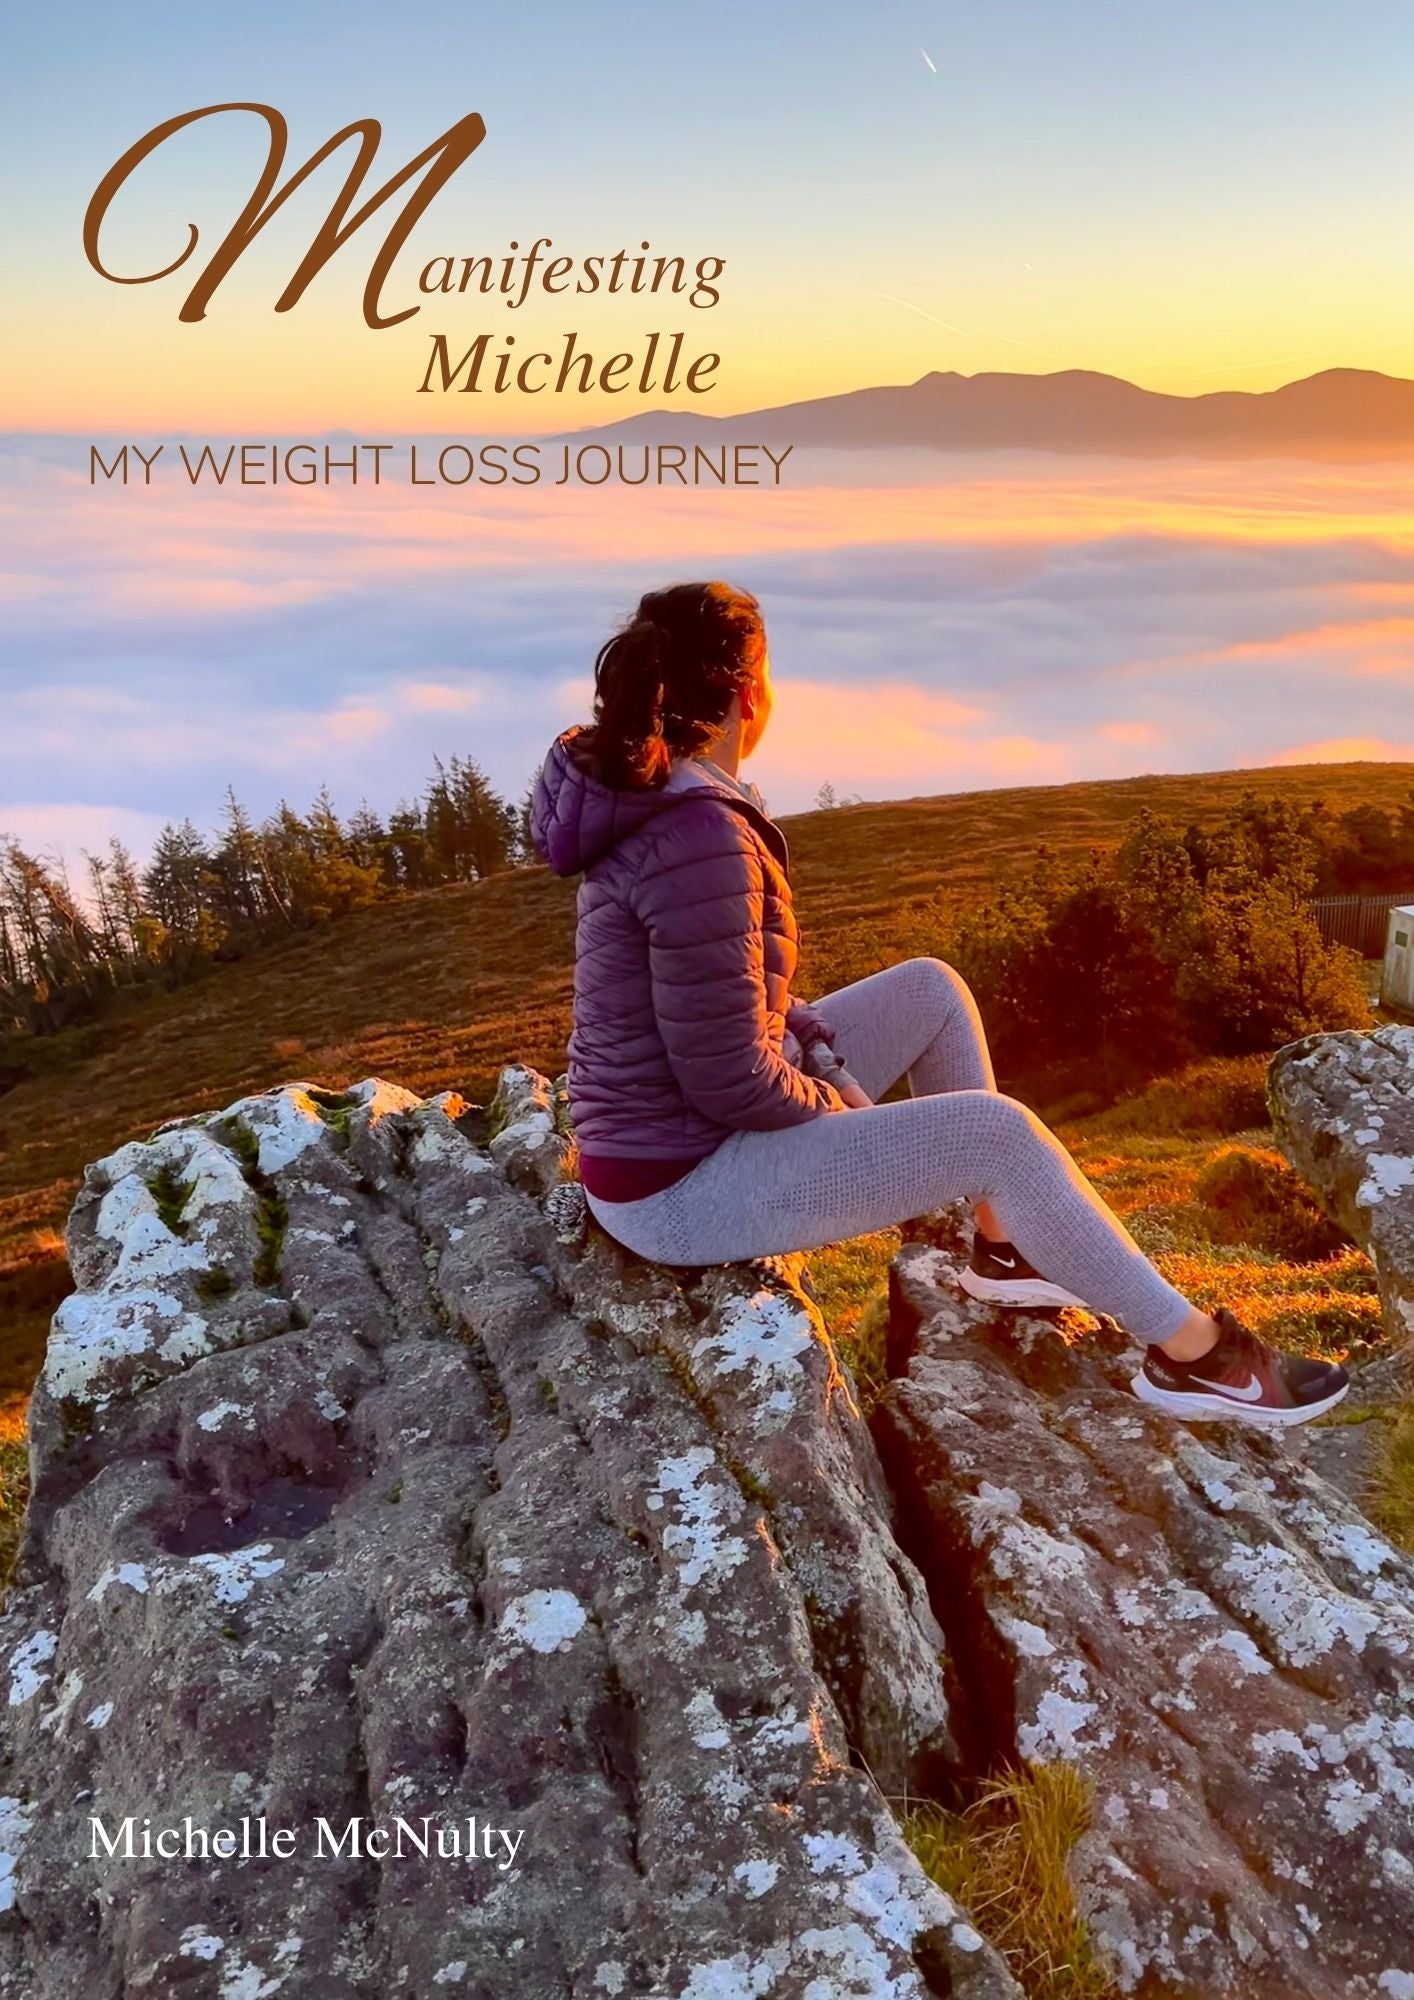 Manifesting Michelle - My Weight Loss Journey by Michelle McNulty